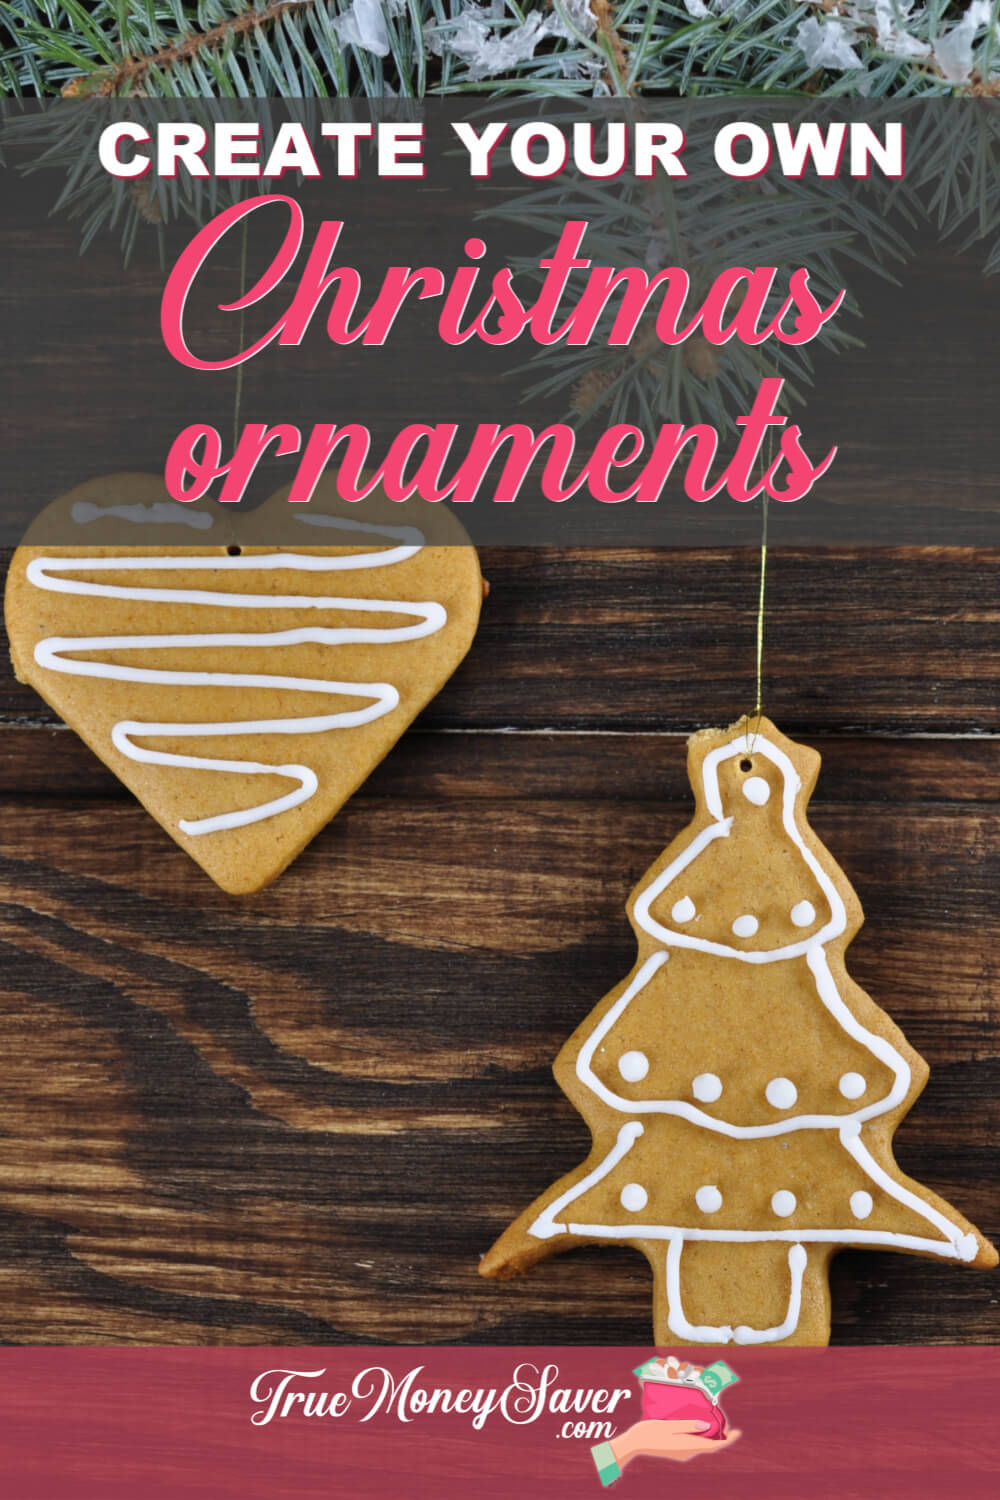 5 Easy & Cheap Christmas Ornaments To Make This Year